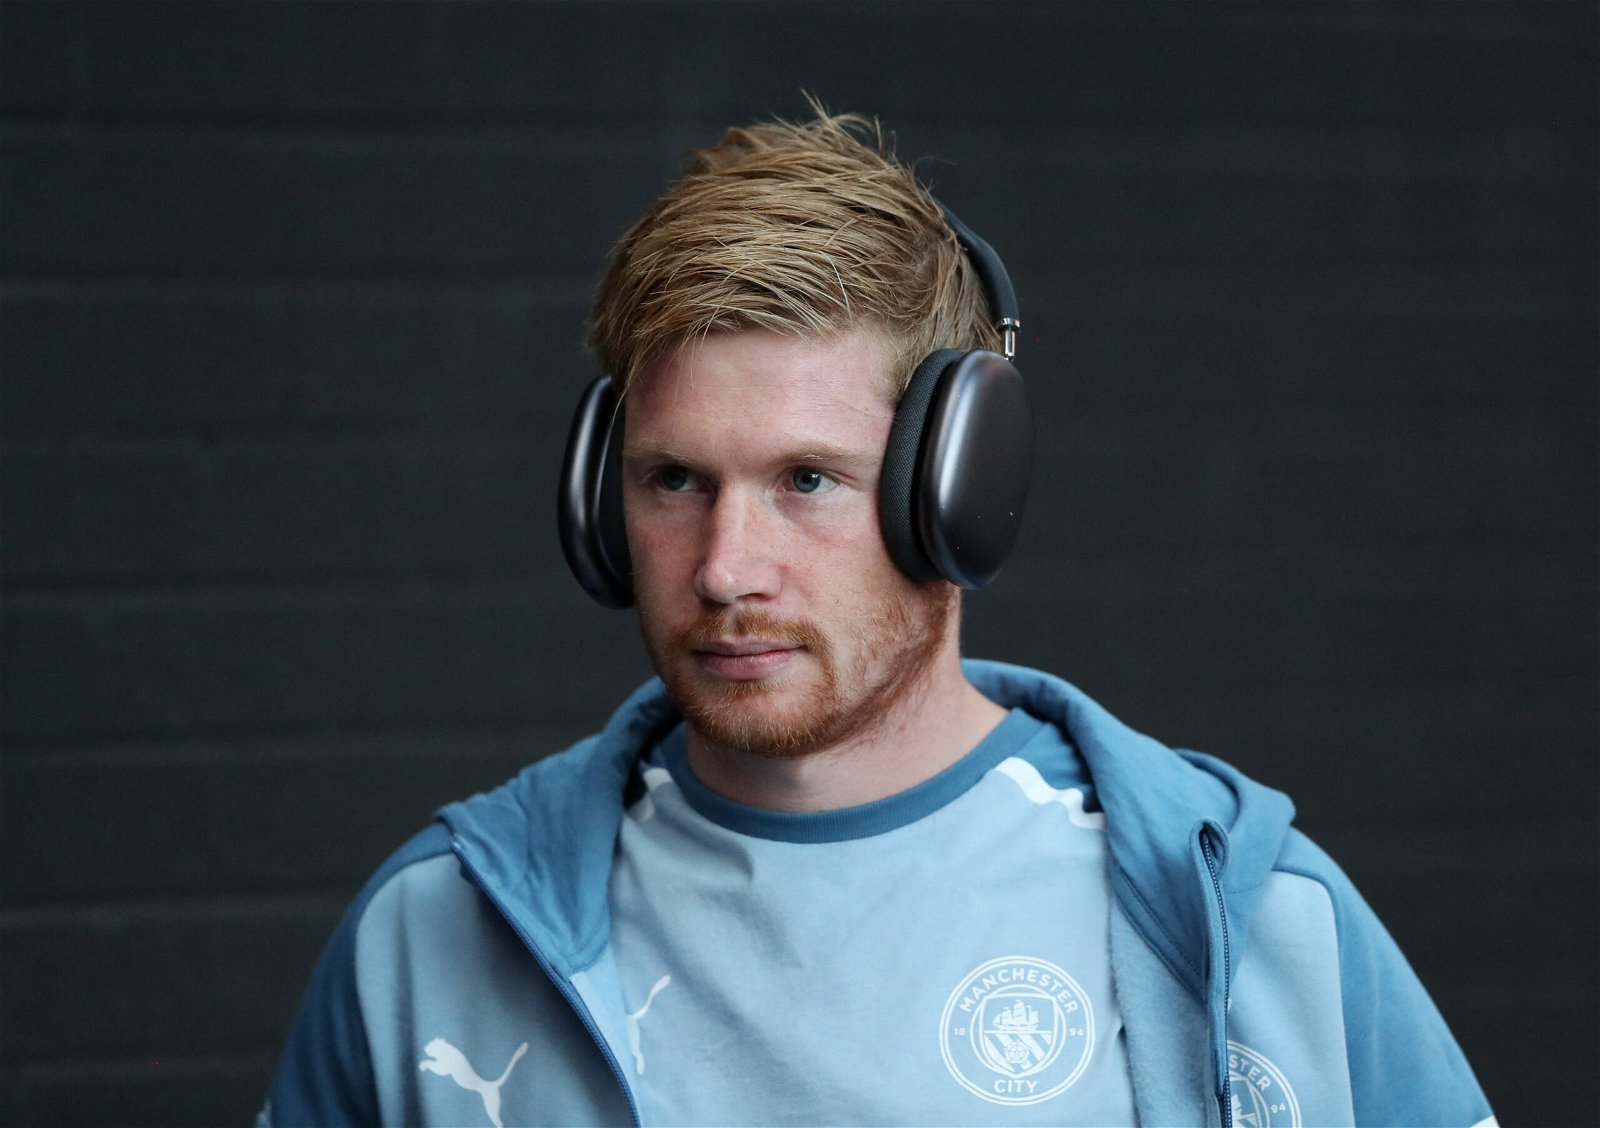 Kevin De Bruyne is one of Manchester City first team midfielders